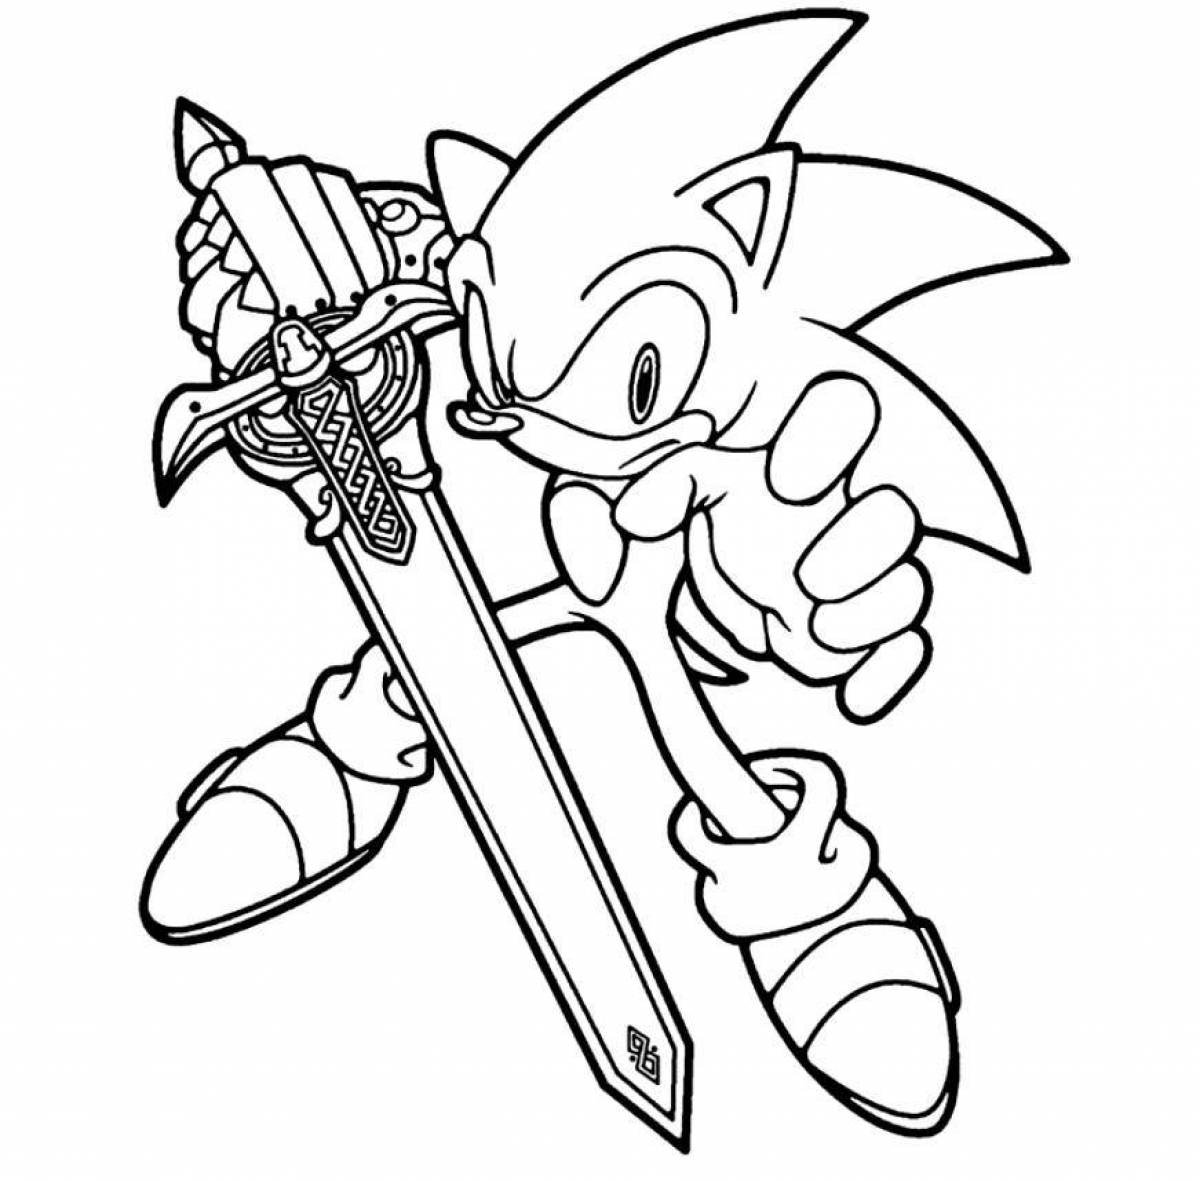 Intriguing sonic game coloring book